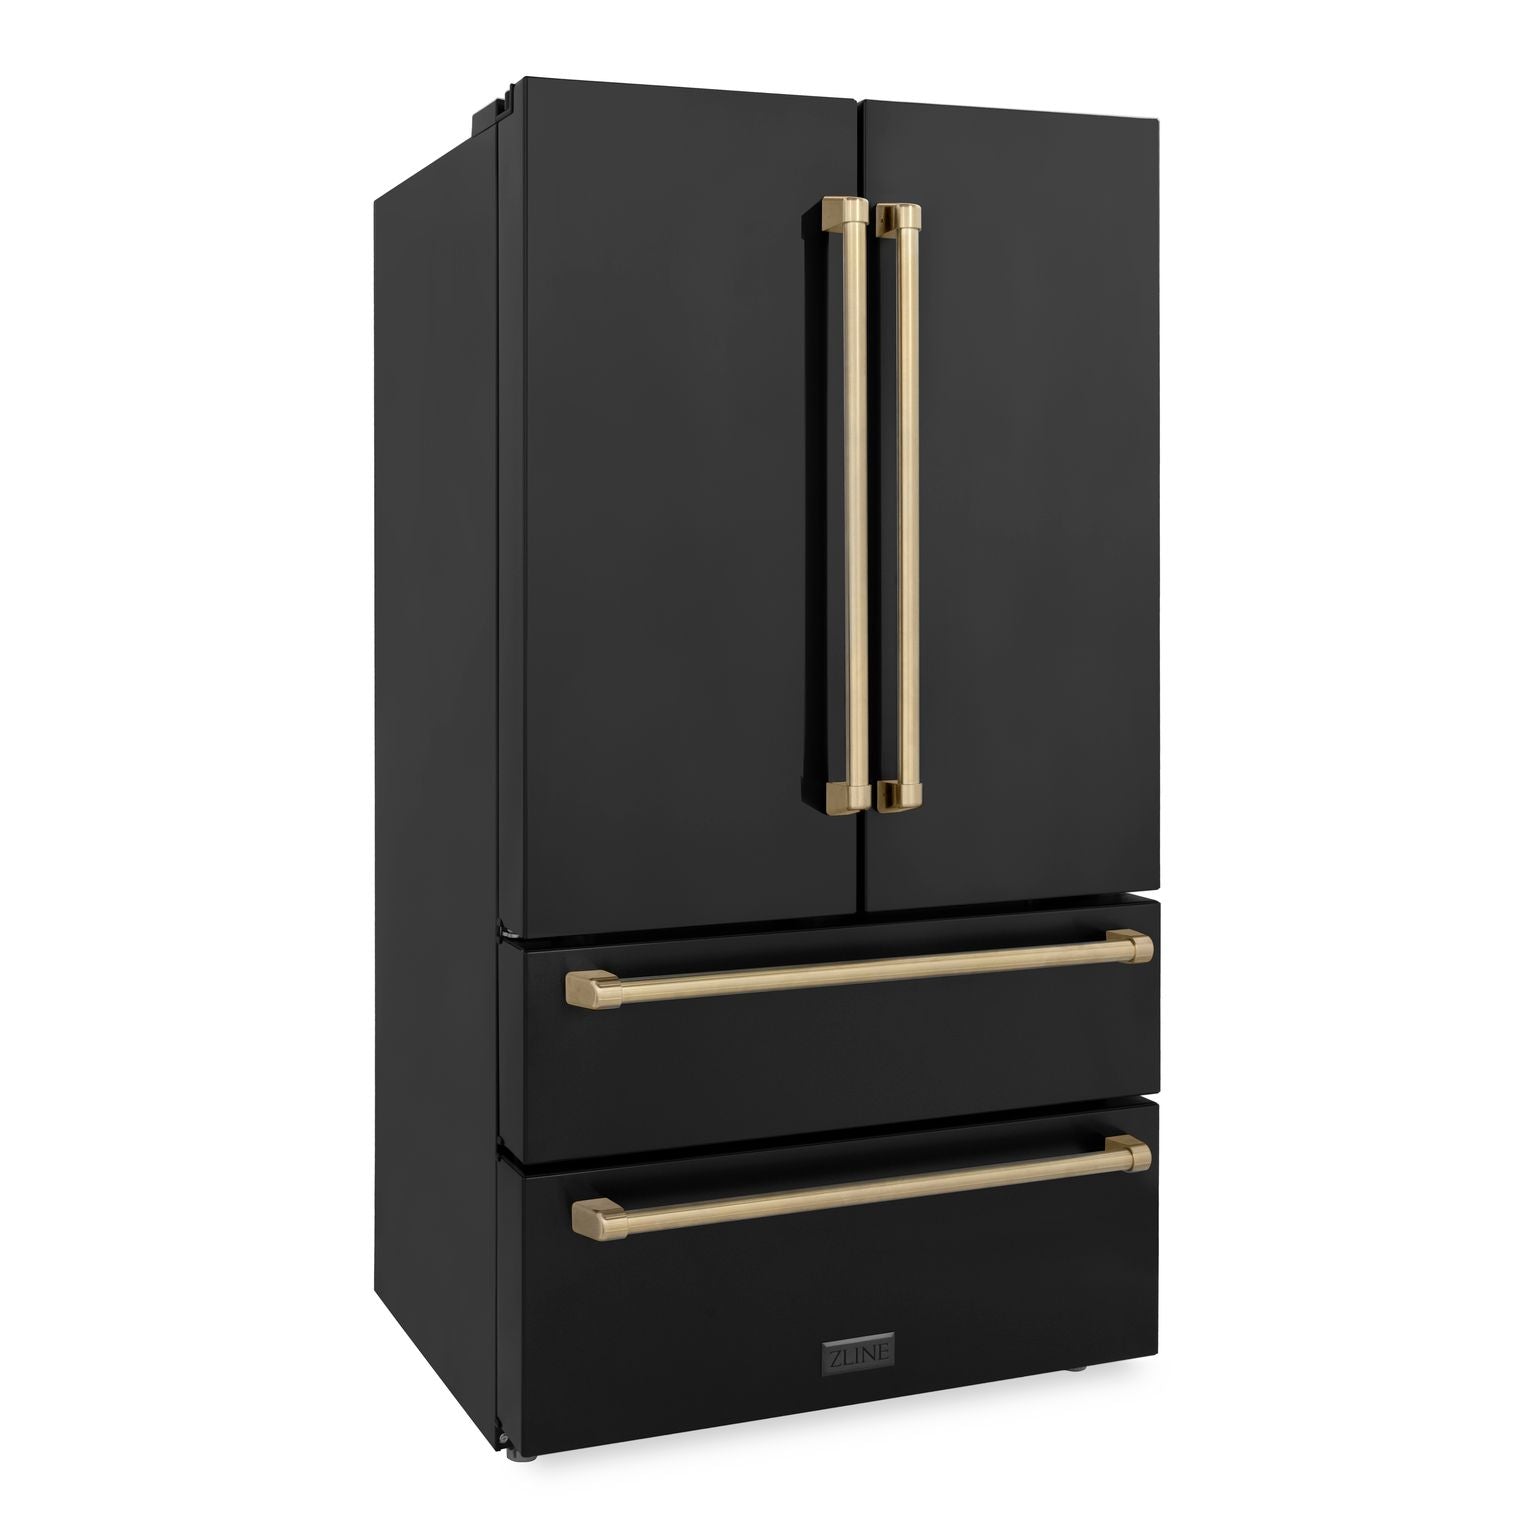 ZLINE 36 In. Autograph 22.5 cu. ft. Refrigerator with Ice Maker in Fingerprint Resistant Black Stainless Steel and Champagne Bronze Accents